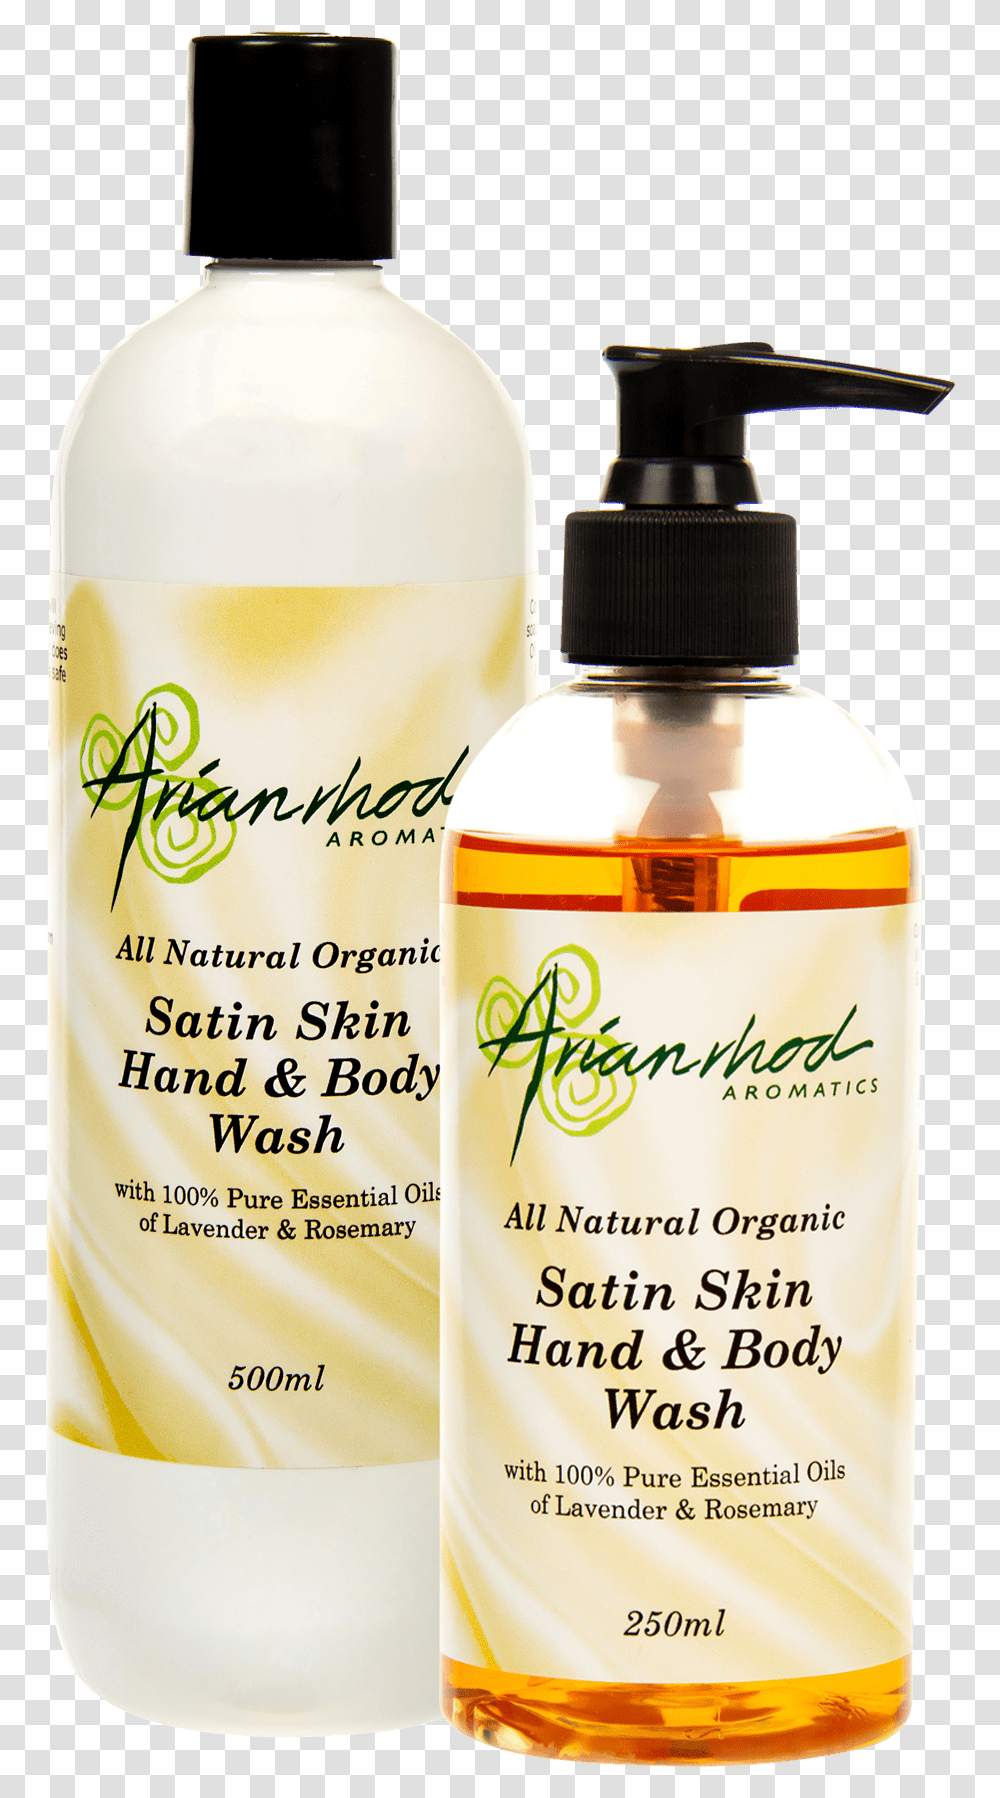 Satin Skin Hand And Body Wash Lavender And Rosemary Liquid Hand Soap, Bottle, Cosmetics, Shaker Transparent Png